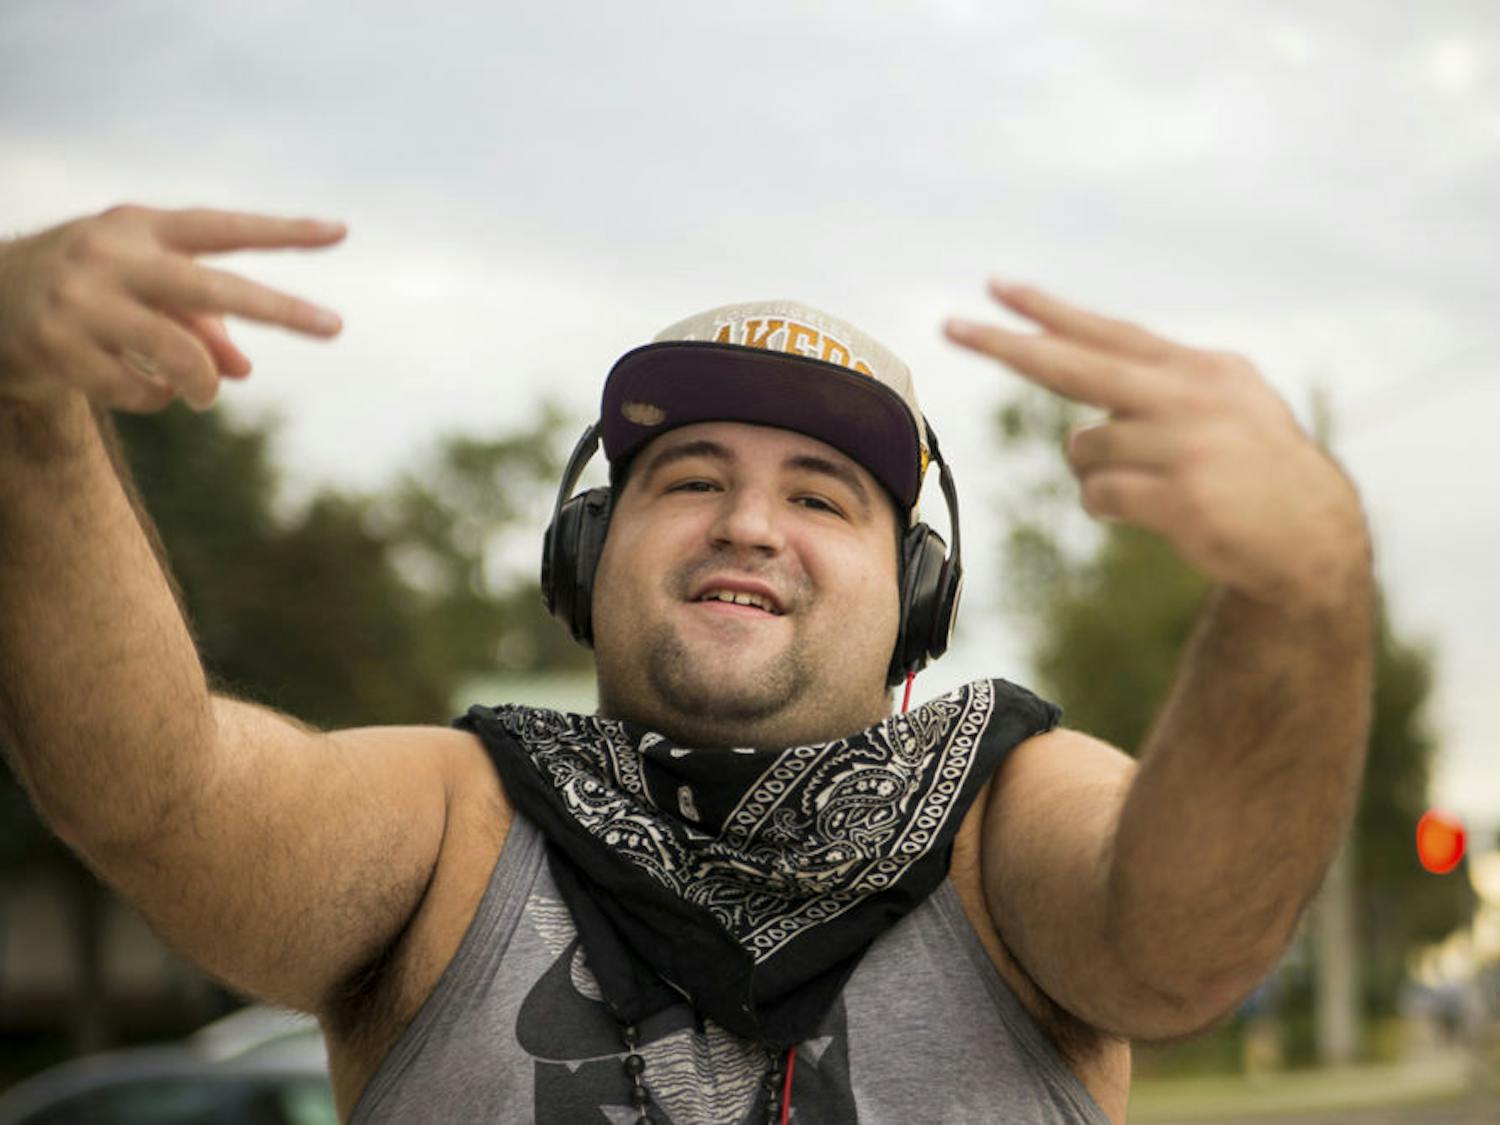 Rafael Torres, 23, raps and dances for passing motorists at the corner of Northwest 16th Avenue and Northwest 43rd Street in Gainesville. "When I feel out there I feel alive. I feel good," he said. "I feel like I’m in the studio, like I’m in a live out-there performance."